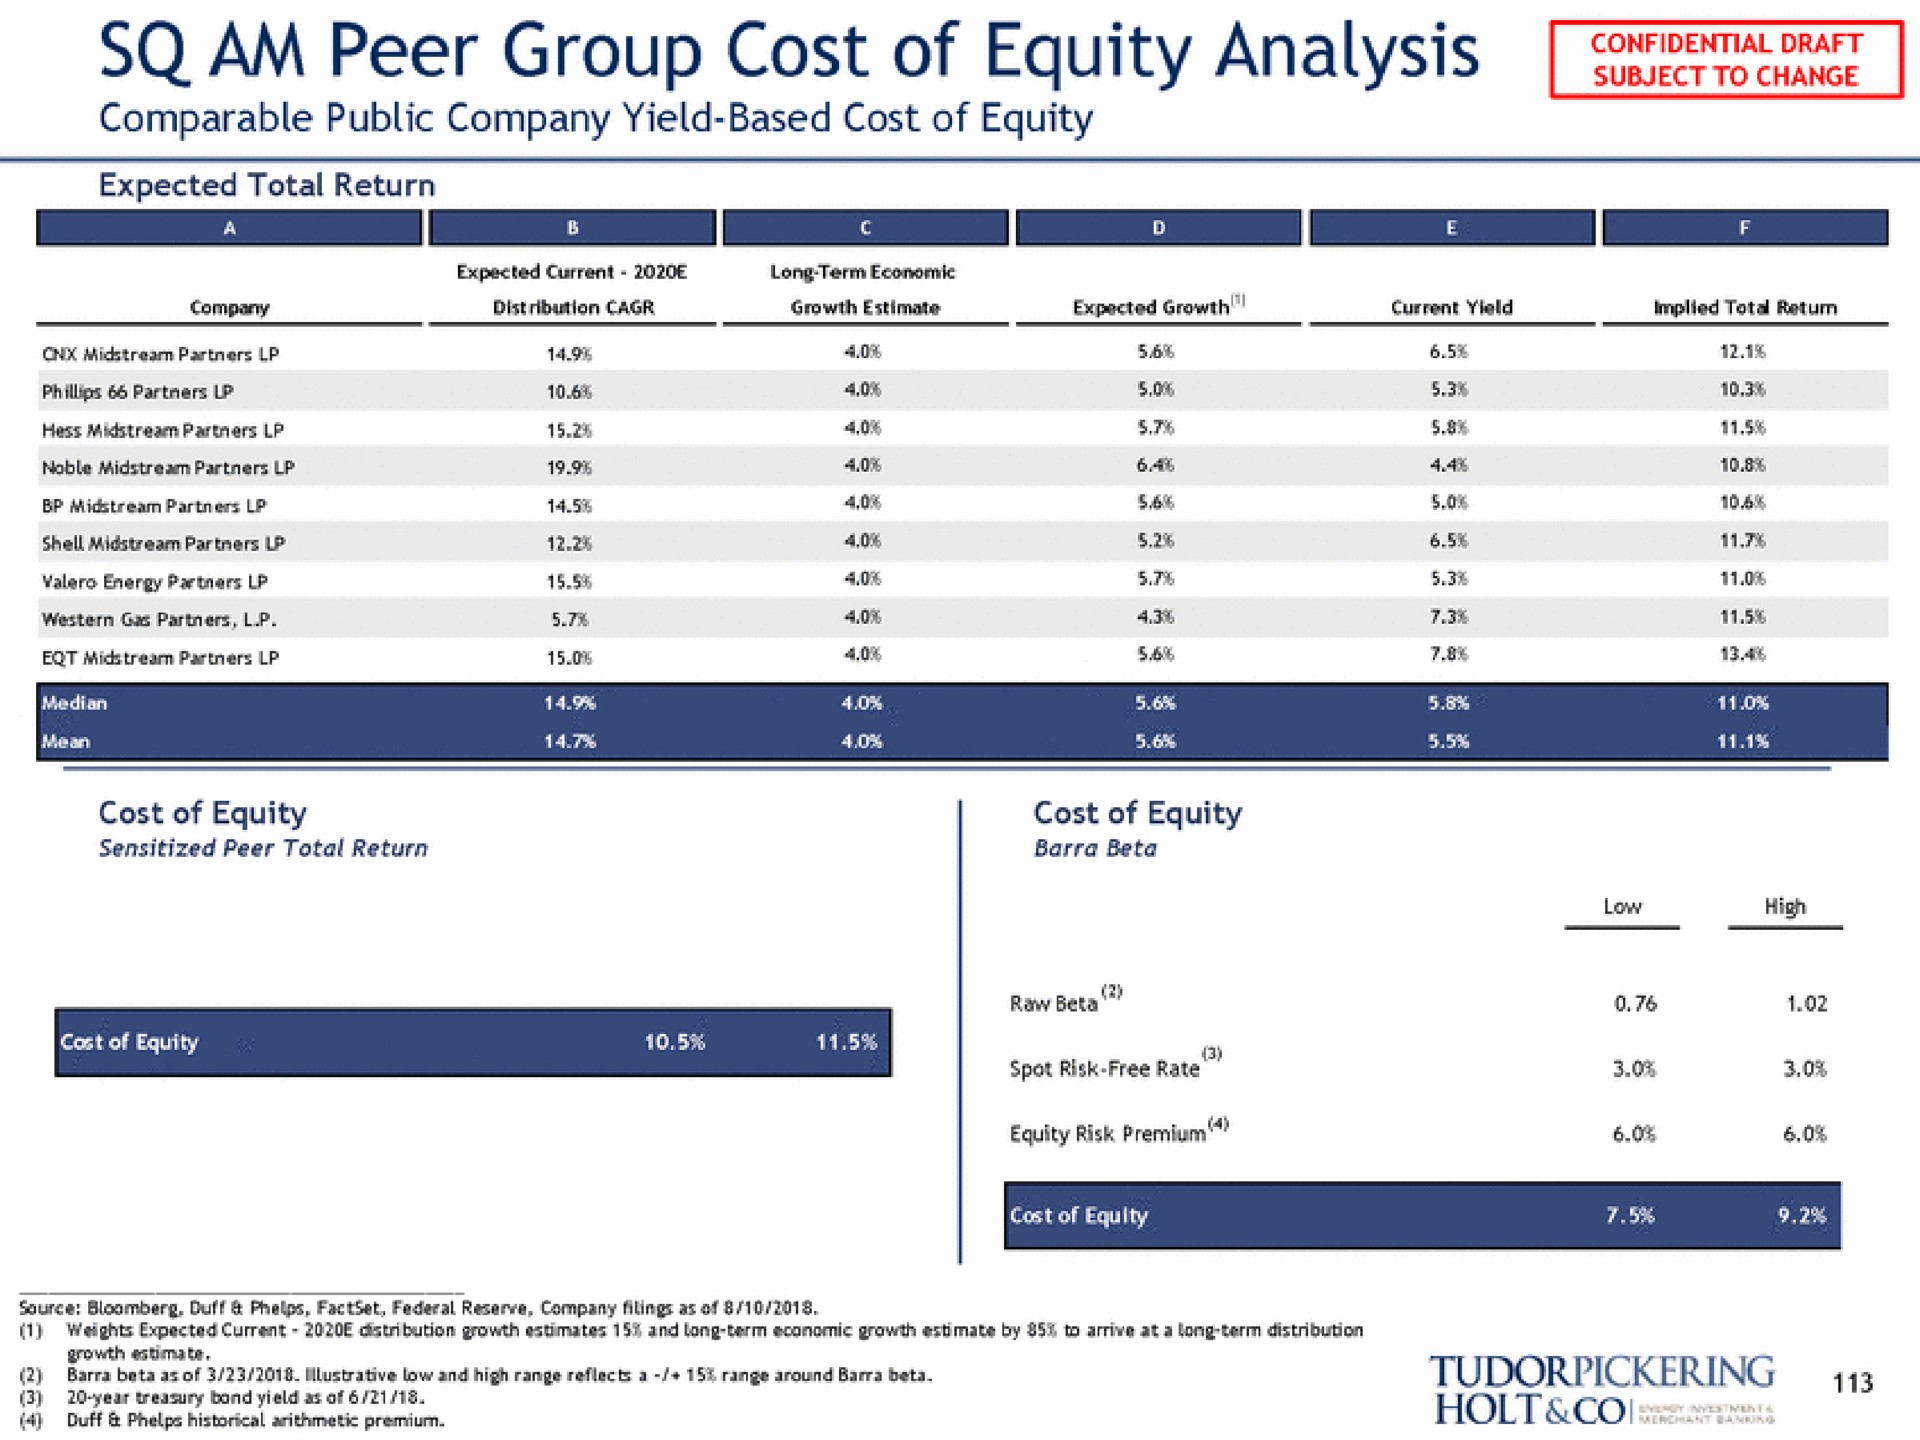 am peer group cost of equity analysis duff historical arithmetic premium holt | Tudor, Pickering, Holt & Co